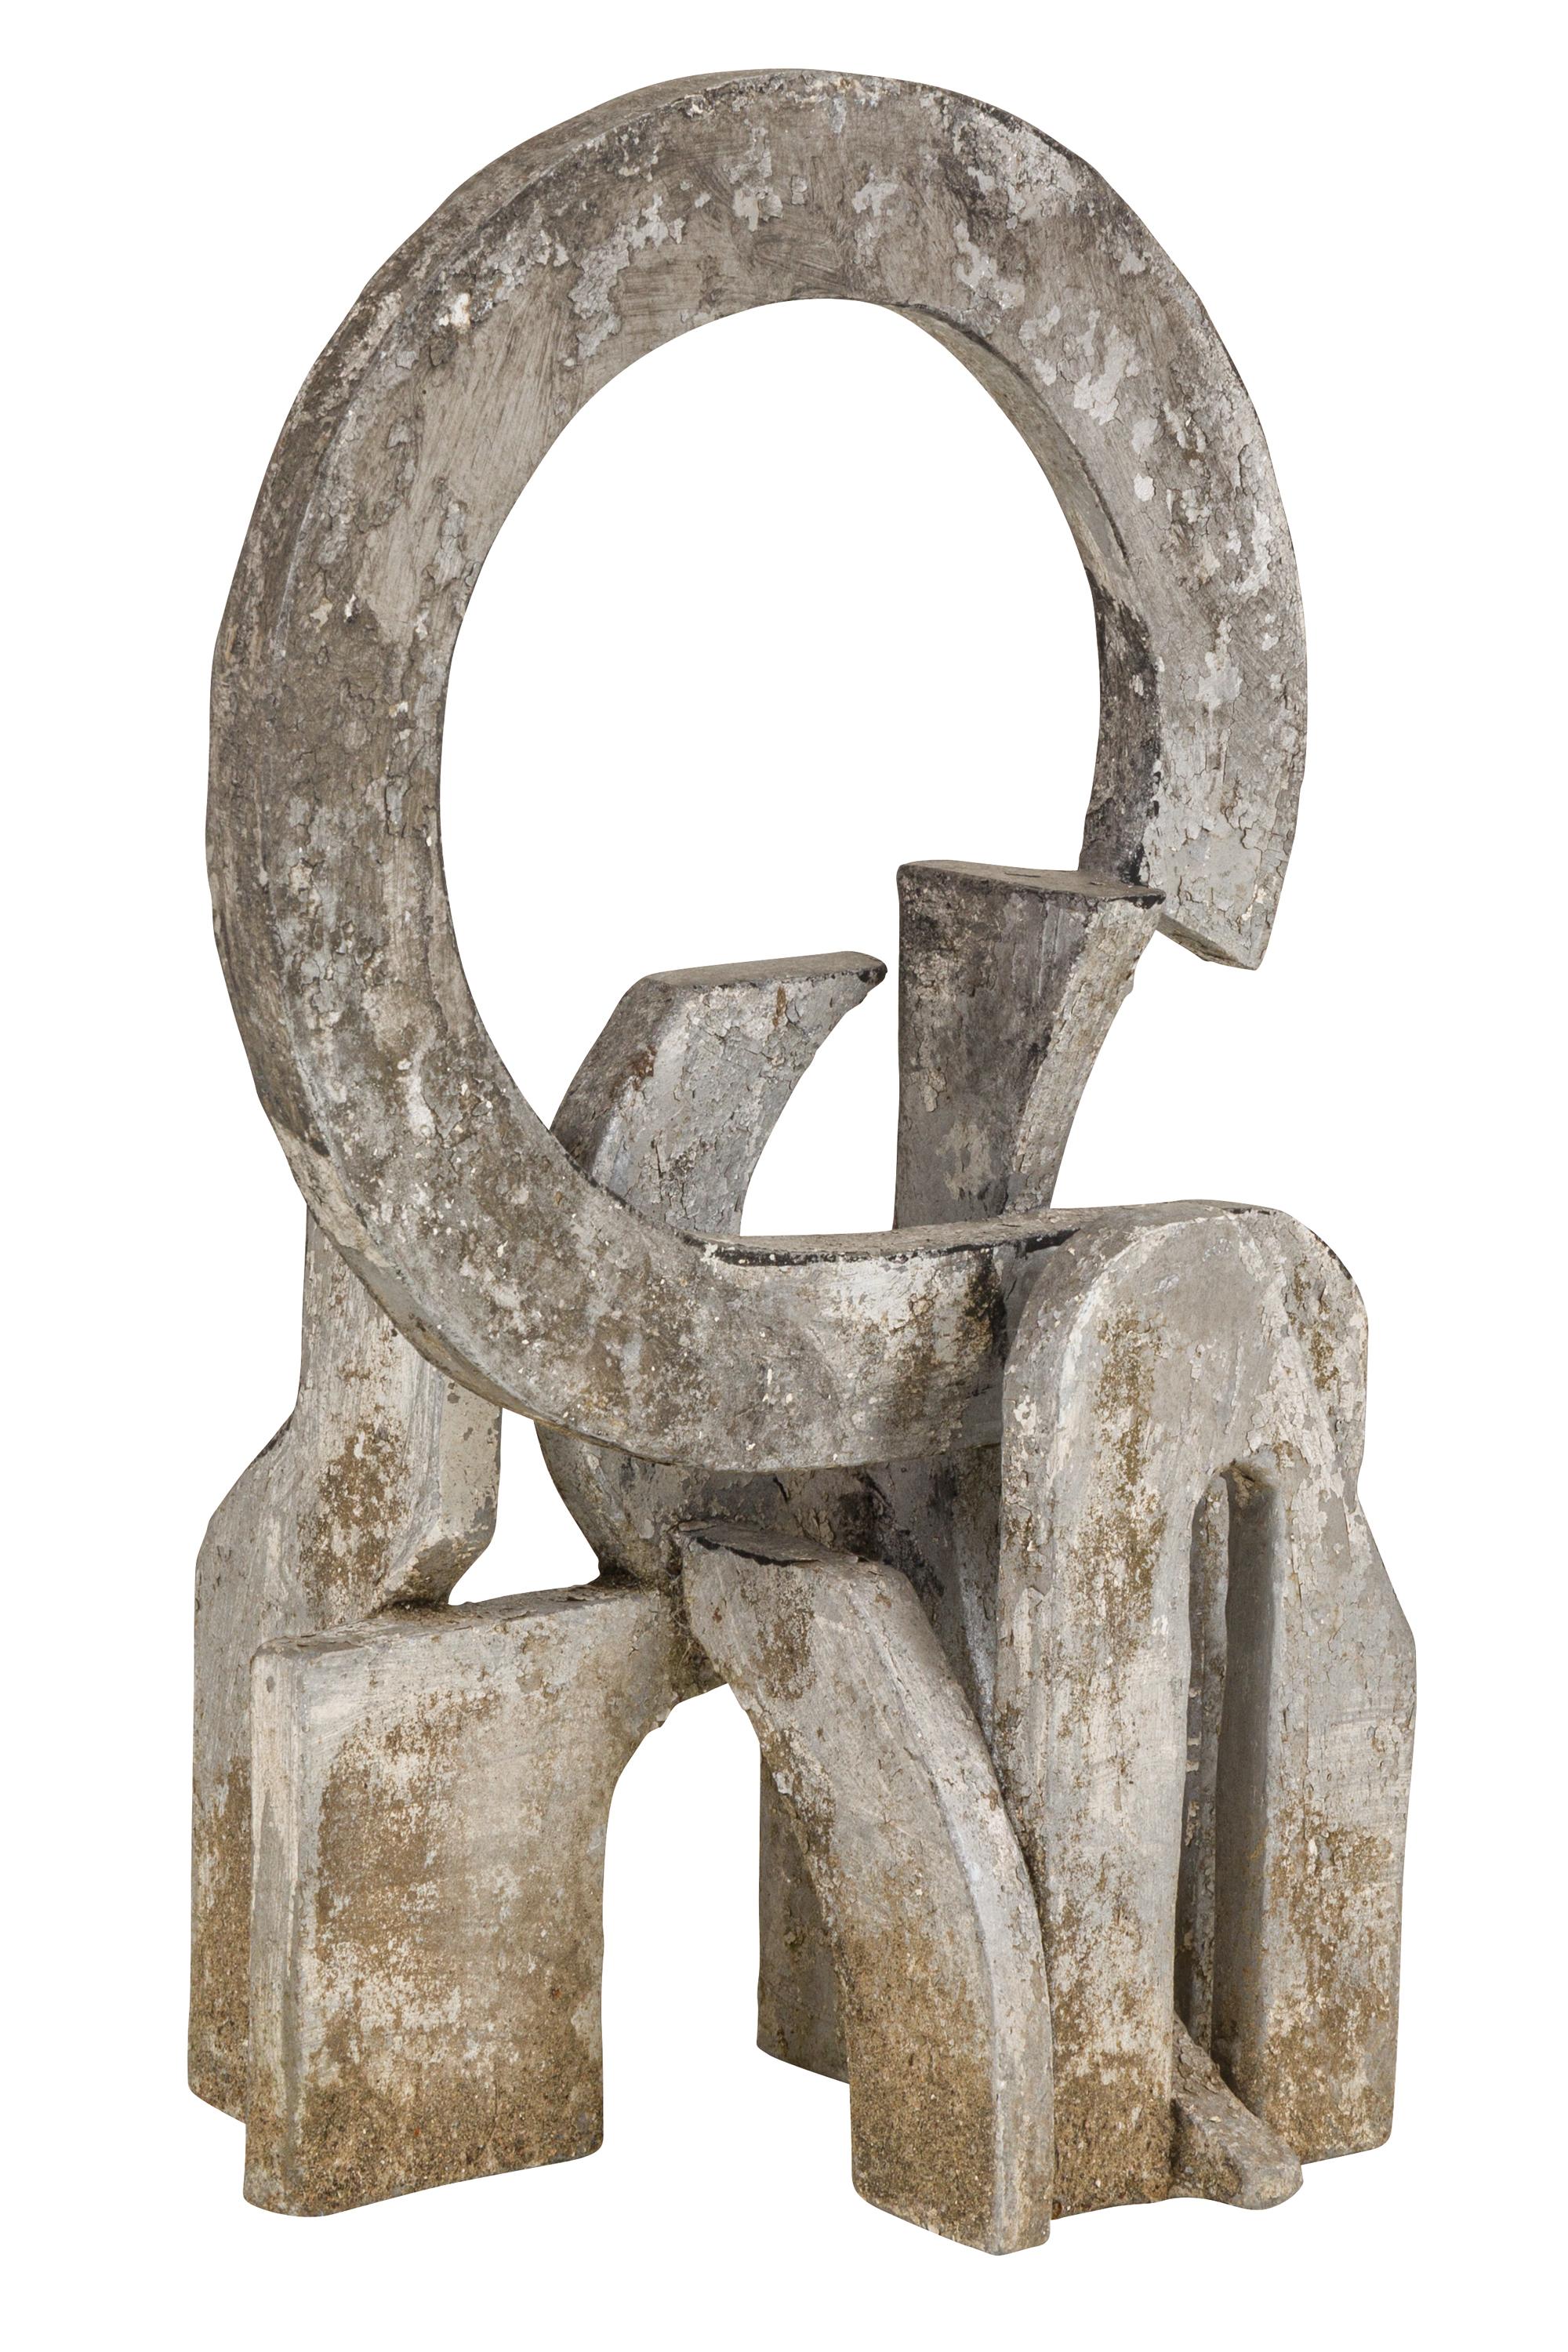 Bent Sørensen is best known as a sculptor but started out as a painter. Around 1948 he met the group of Danish and international artists connected to the Galerie Denise René in Paris. Sørensen sculptures often contain a sharpness, this sculpture